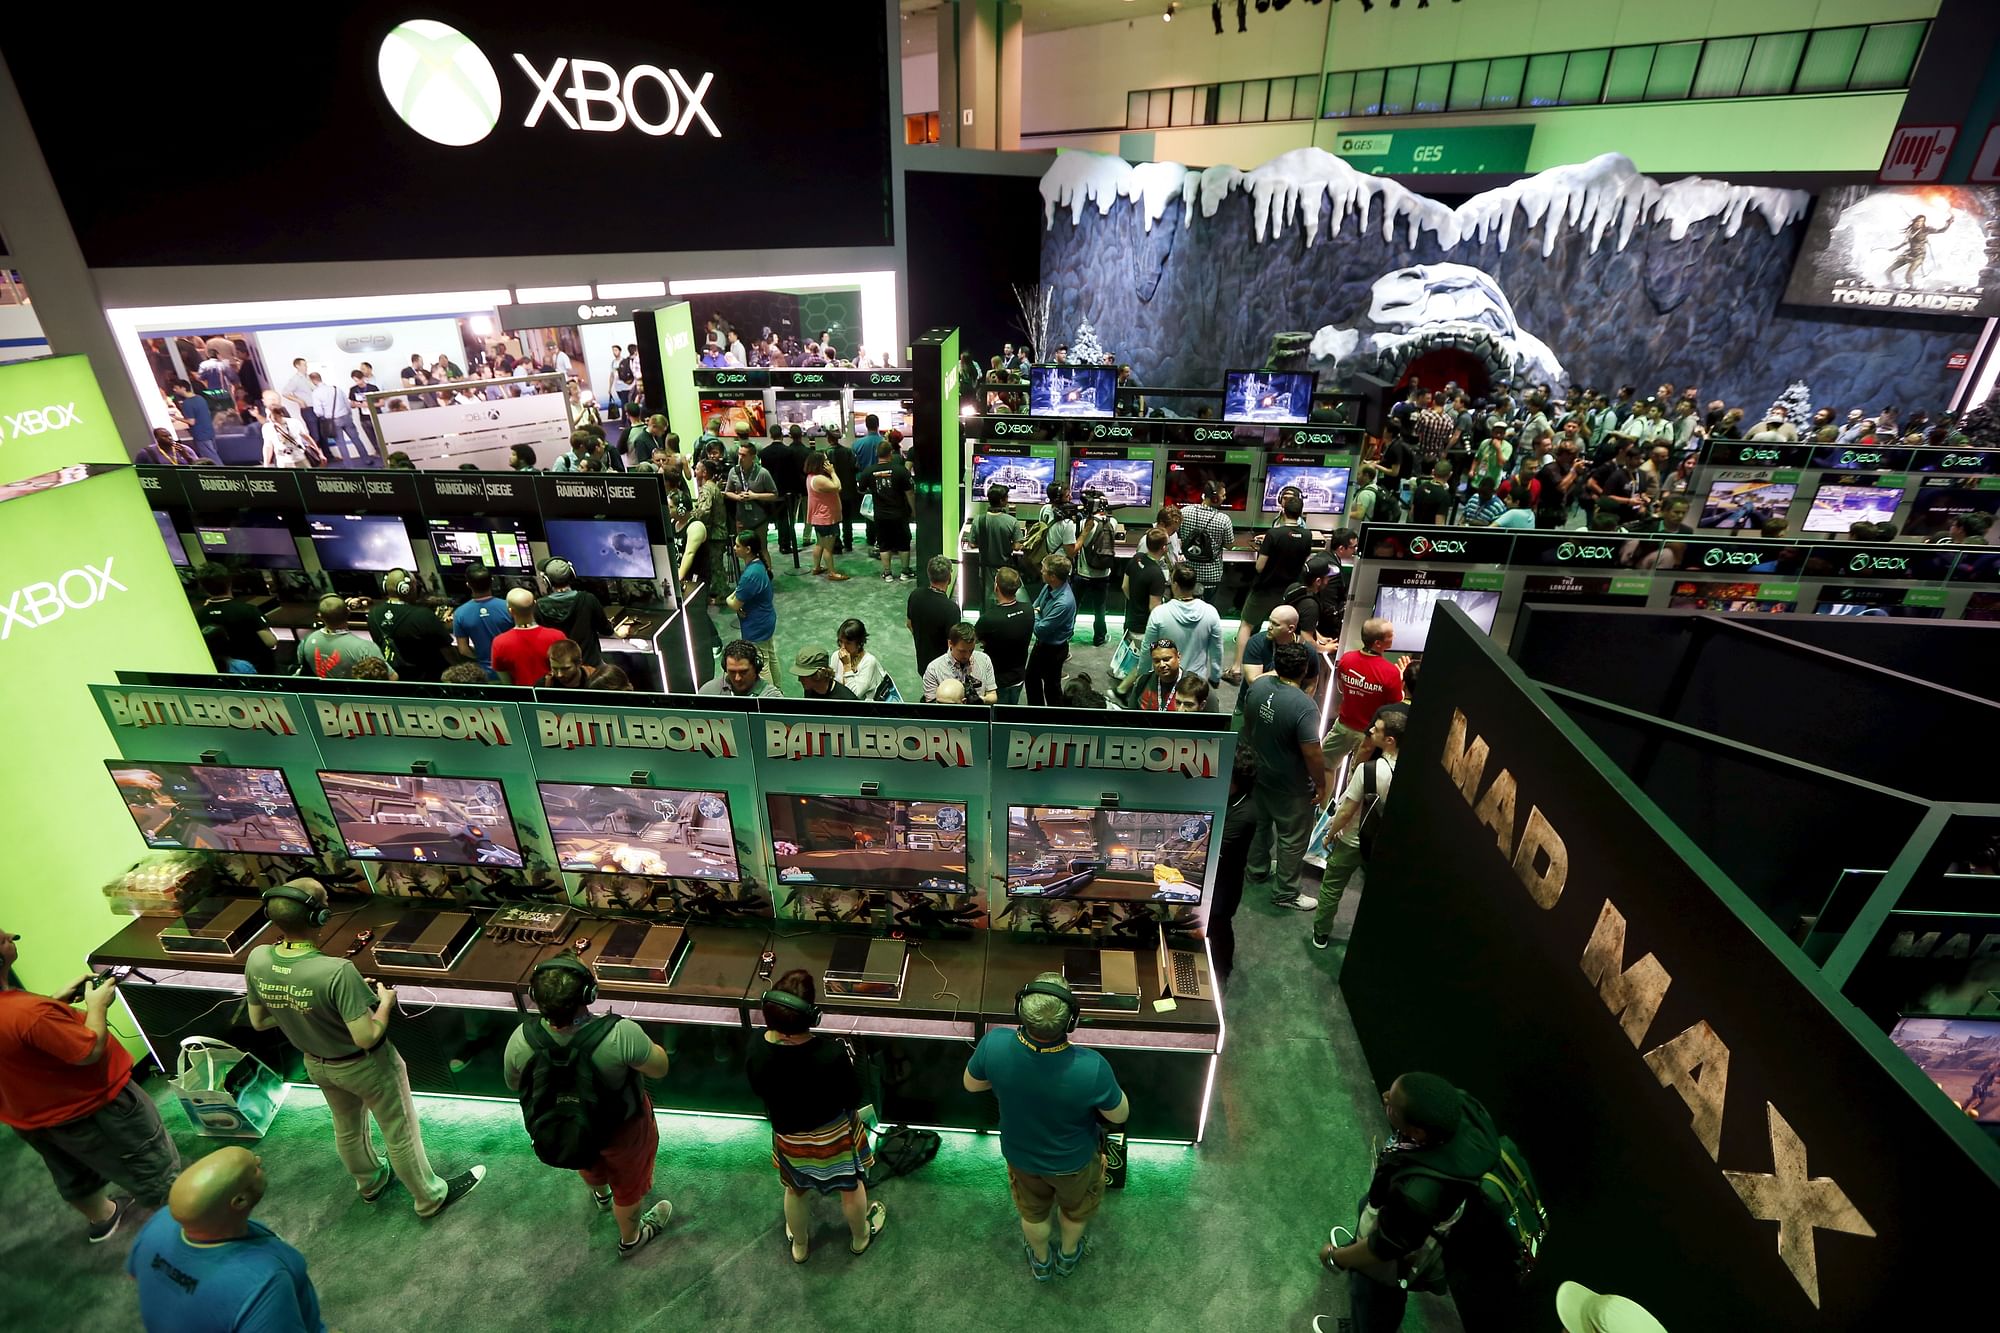 In Pictures The Electronic Entertainment Expo (E3) 2015